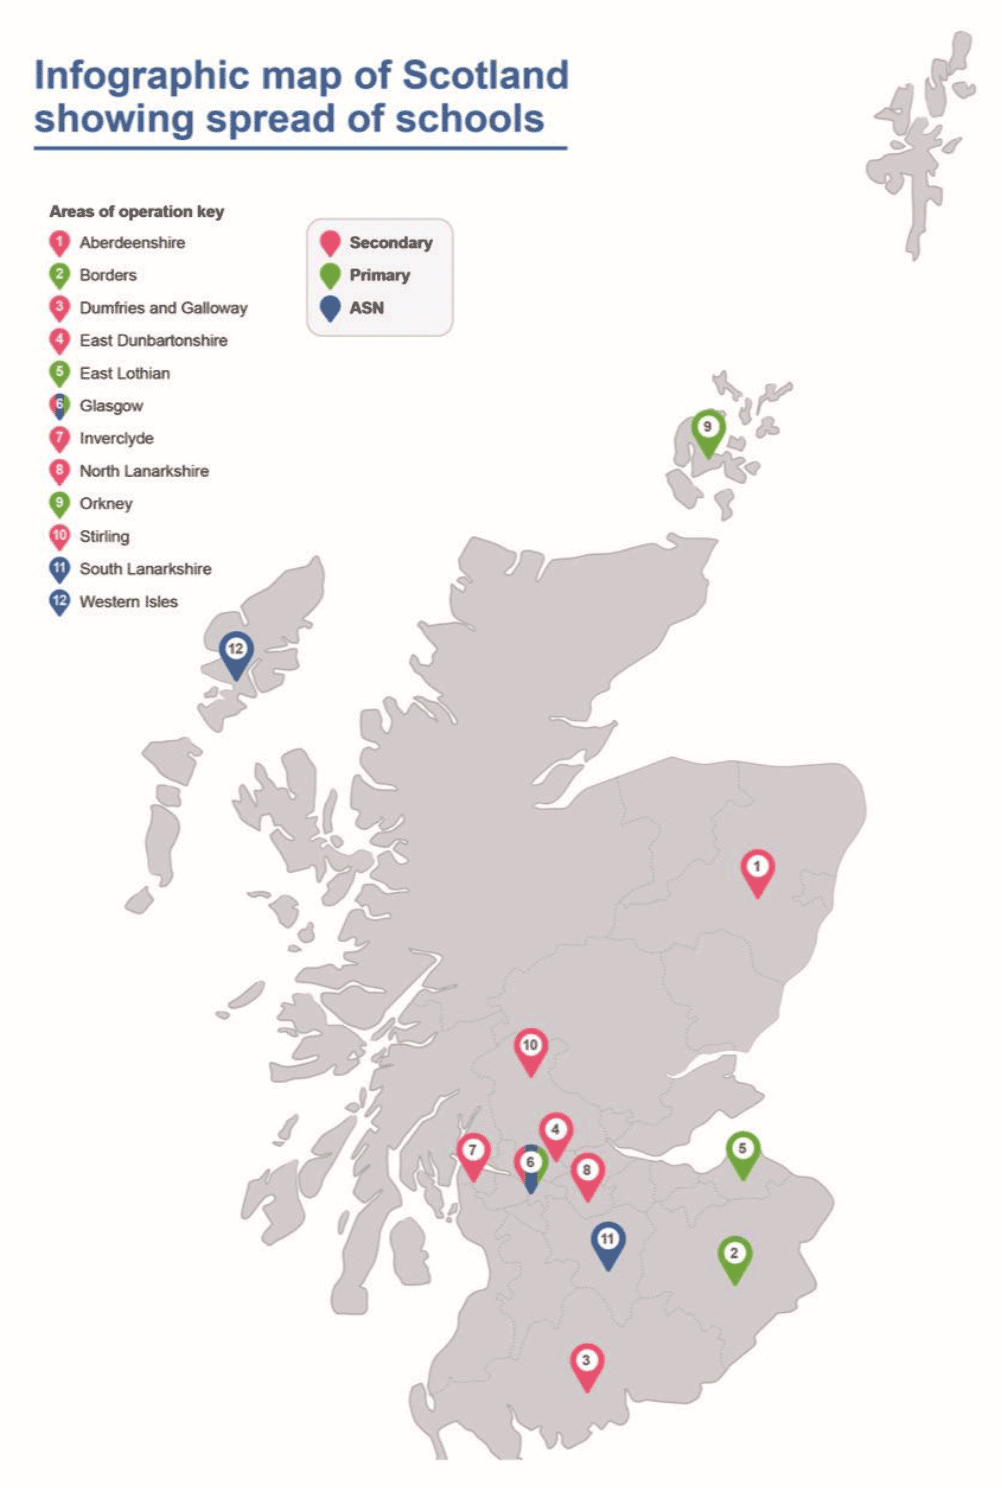 A grey map of Scotland showing the locations of participating schools. Pink, green and blue pins are used to denote secondary, primary and ASN schools, respectively. The map shows that participating schools were based in: Aberdeenshire, Borders, Dumfies and Galloway East Lothain, Glasgow, Inverclyde, North Lanarkshire, Orkney, Stirling, South Lanarkshire, and Western Isles.